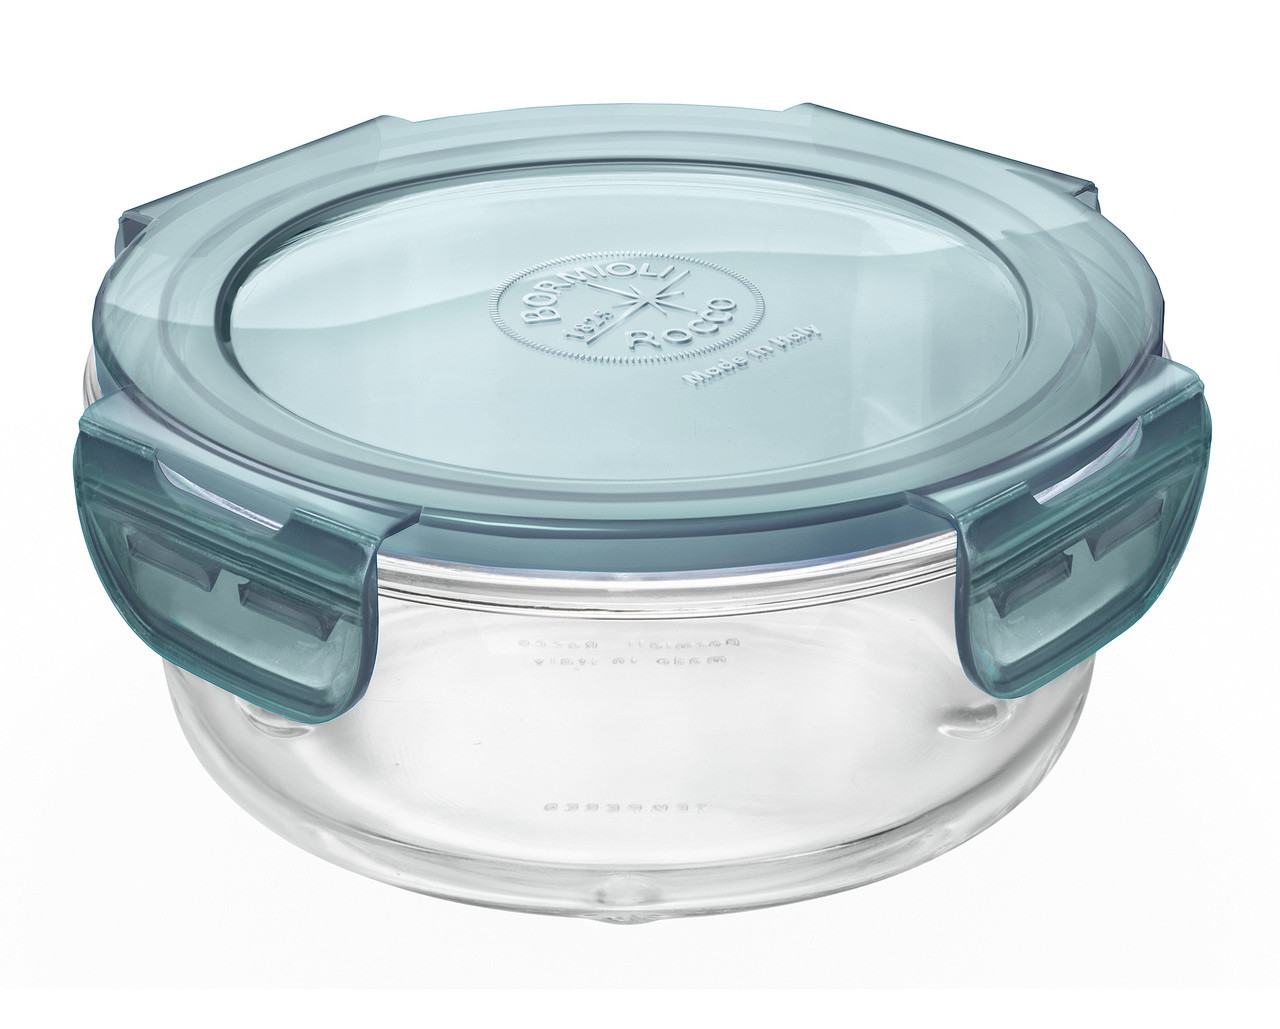 Bormioli Rocco Frigoverre Evolution Collection - 5.5-Inch Round Container -  50cl (17 oz)- Slate Blue Lid (BR 389111MG1321990)